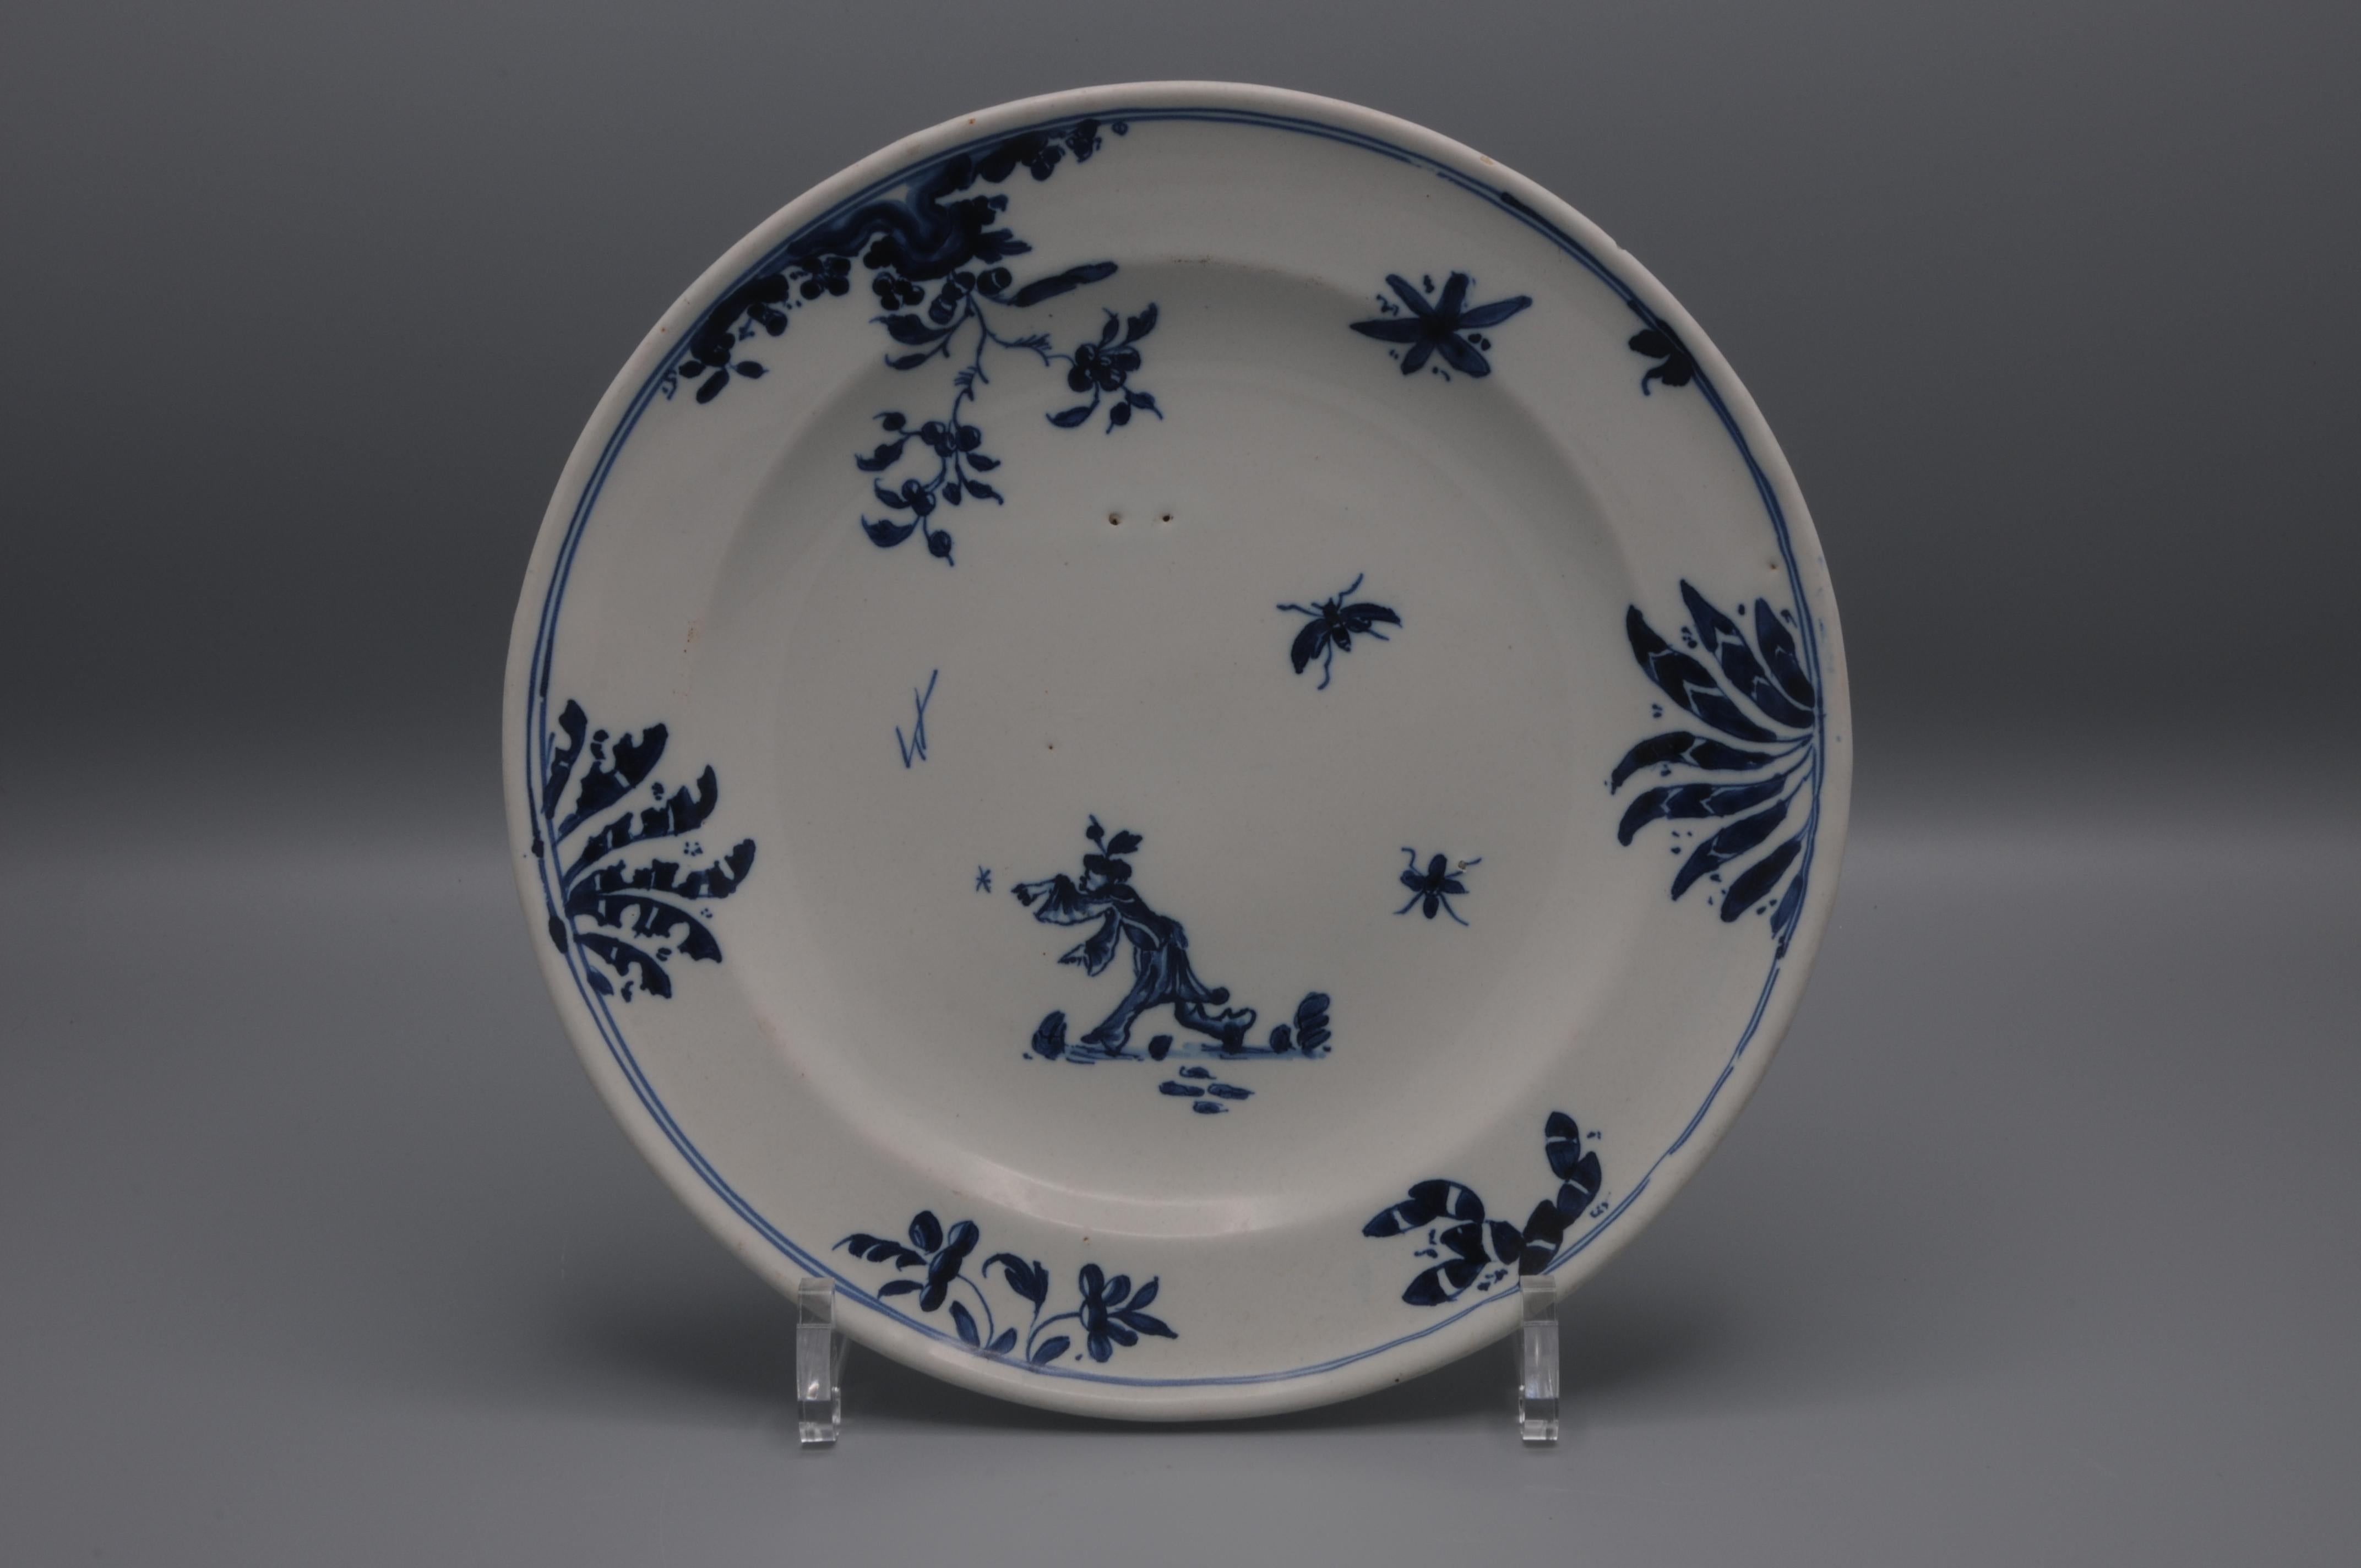 Moustiers faience Chinoiserie plate

Good condition: light chipping and some usual wear to the rim.